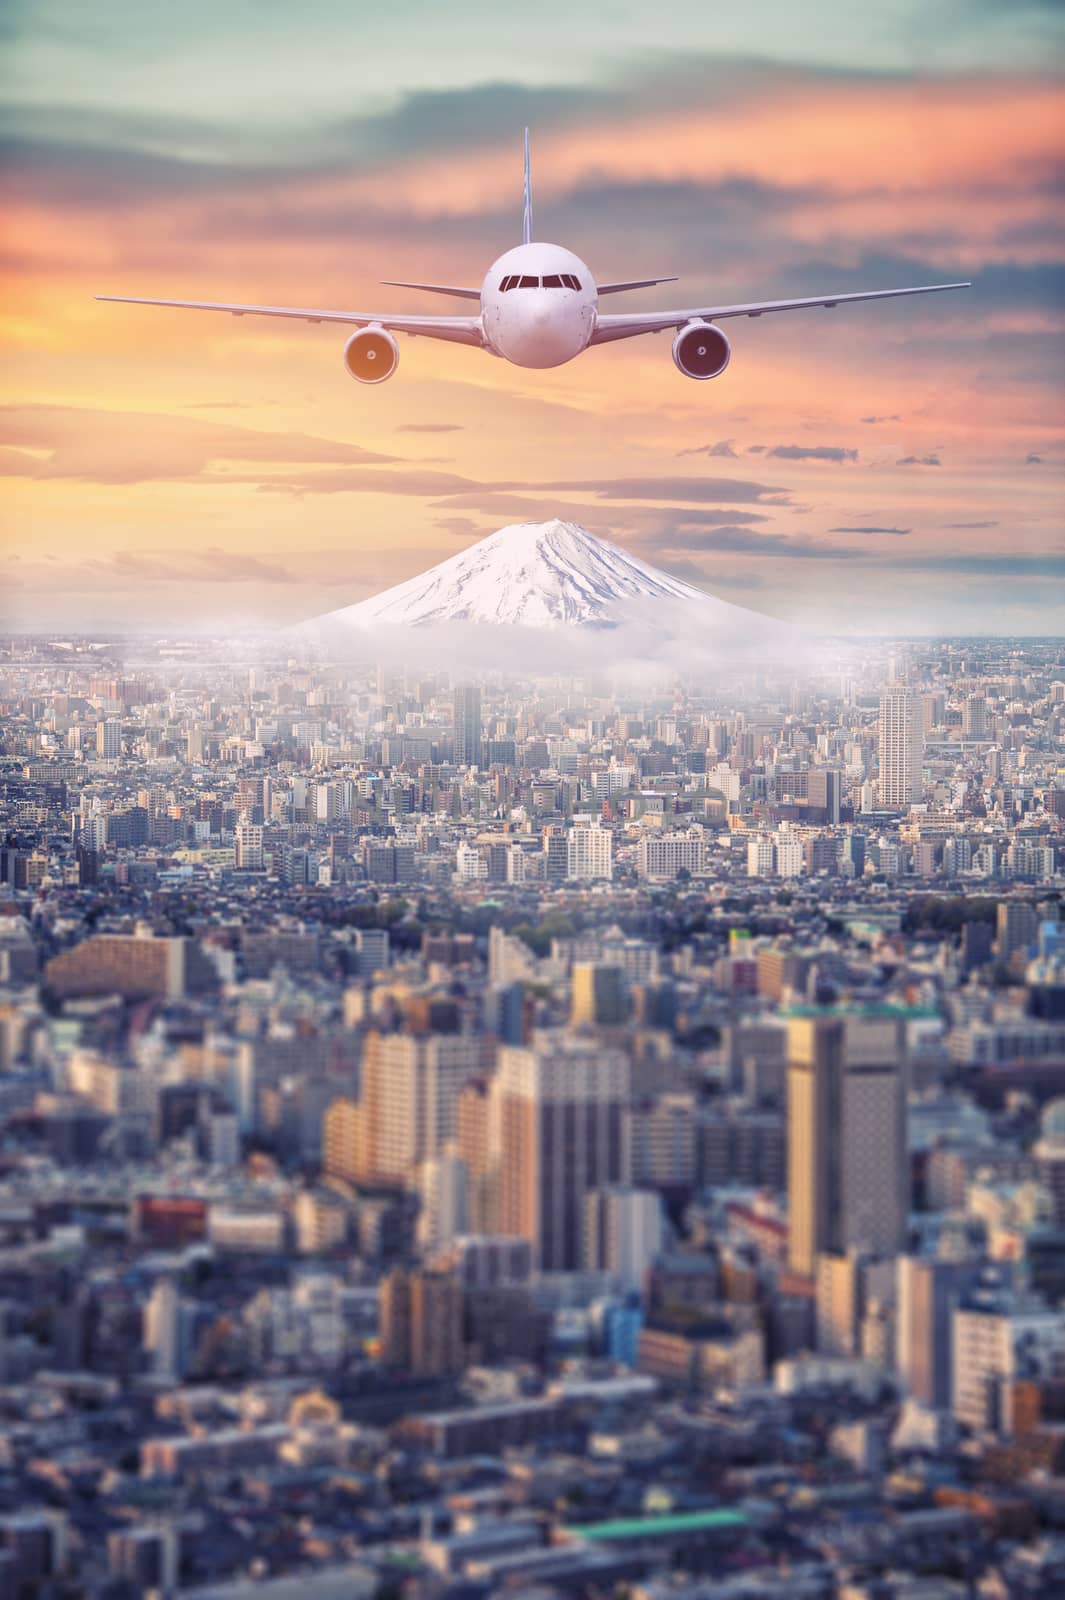 Retouch Mt.Fuji covered with snow and Japan cityscape with airpl by Surasak